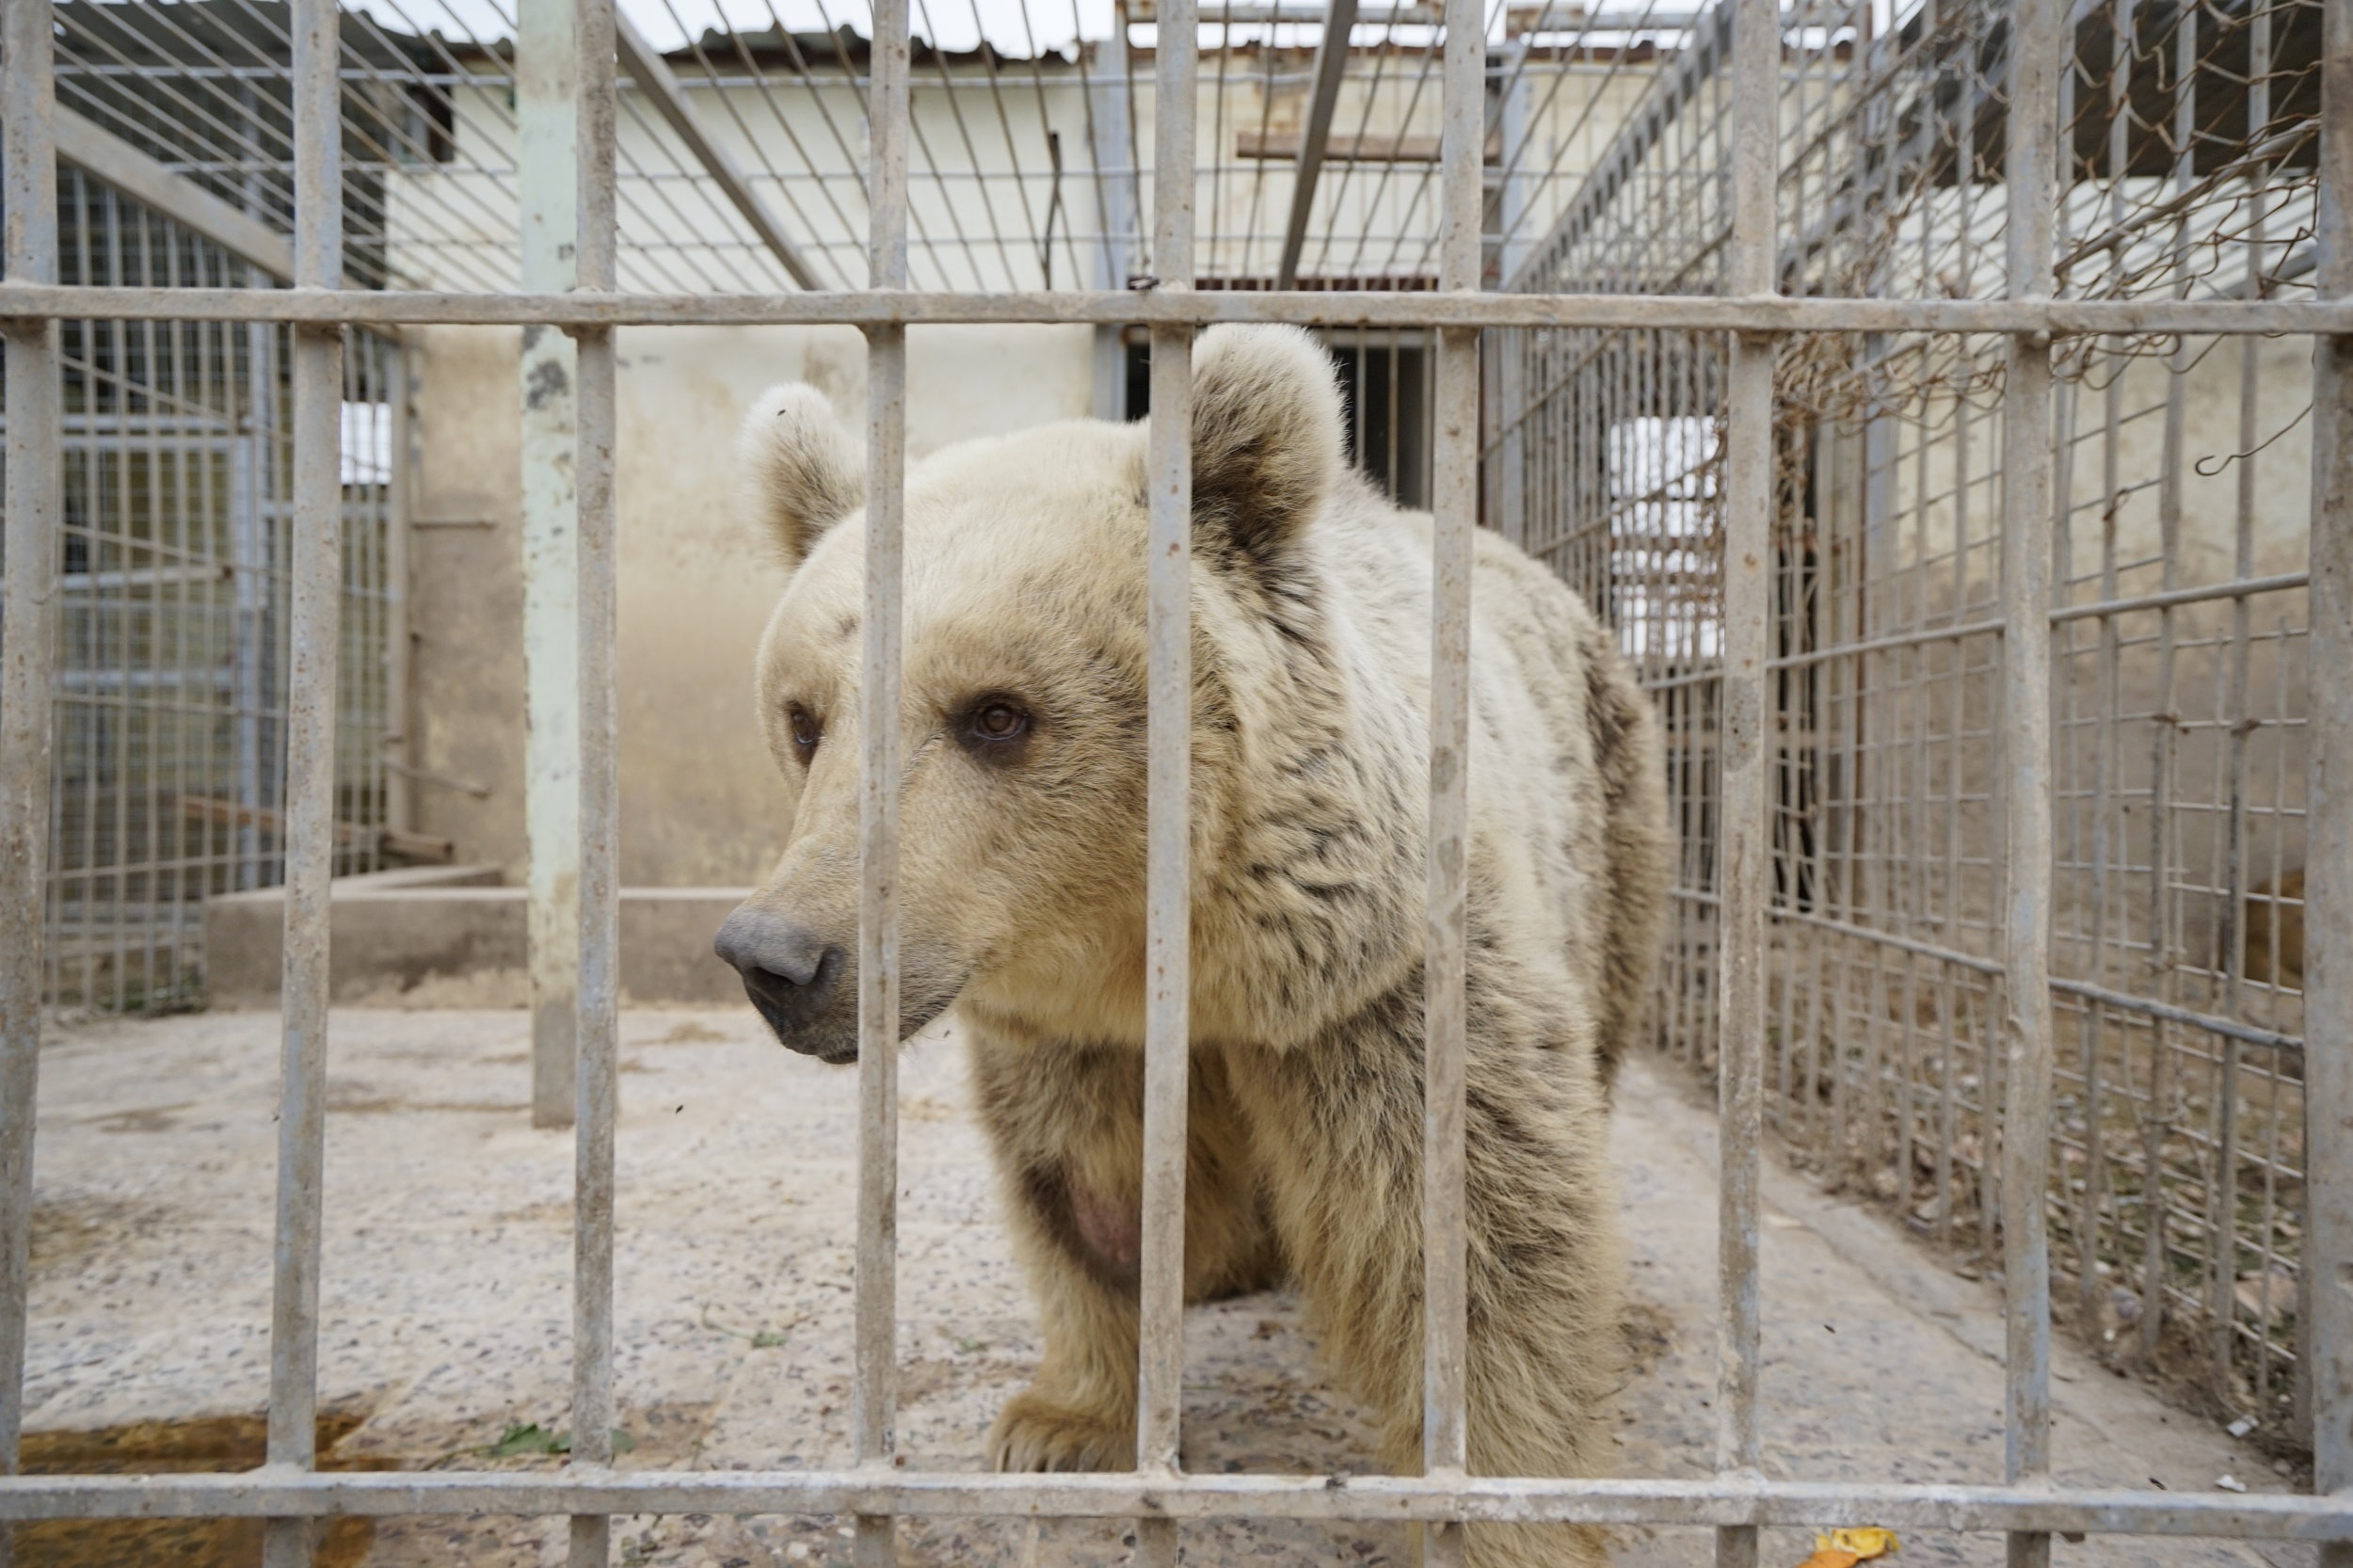  Lula the bear was found in the abandoned Mosul Zoo. Photo by Four Paws.  